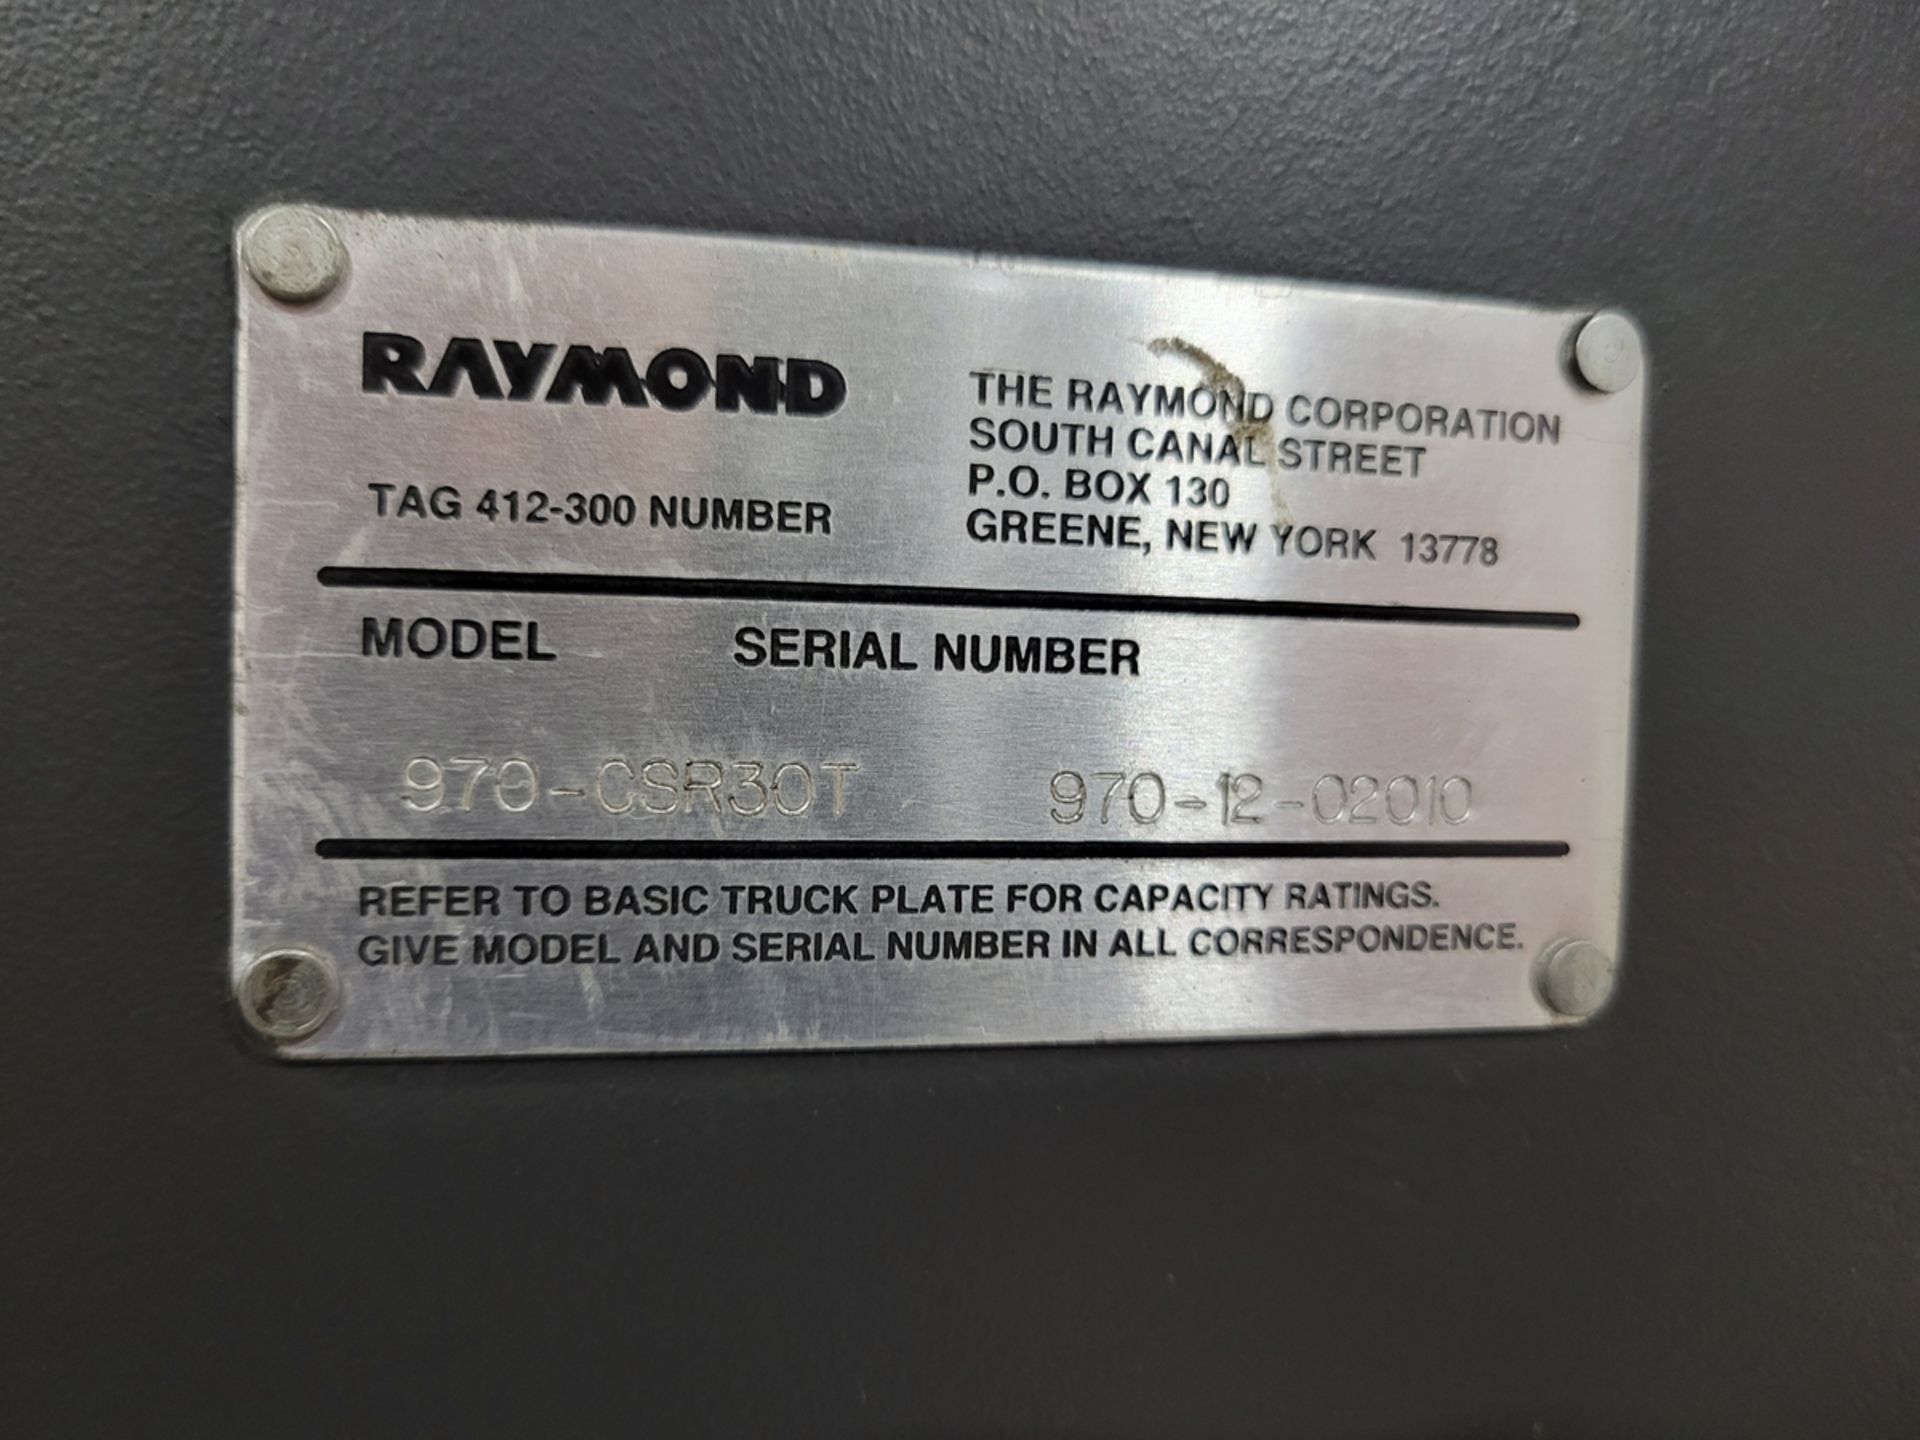 Raymond Model 970-CSR30T Man Up, Turret Swing Truck w/ Charger - Image 16 of 22